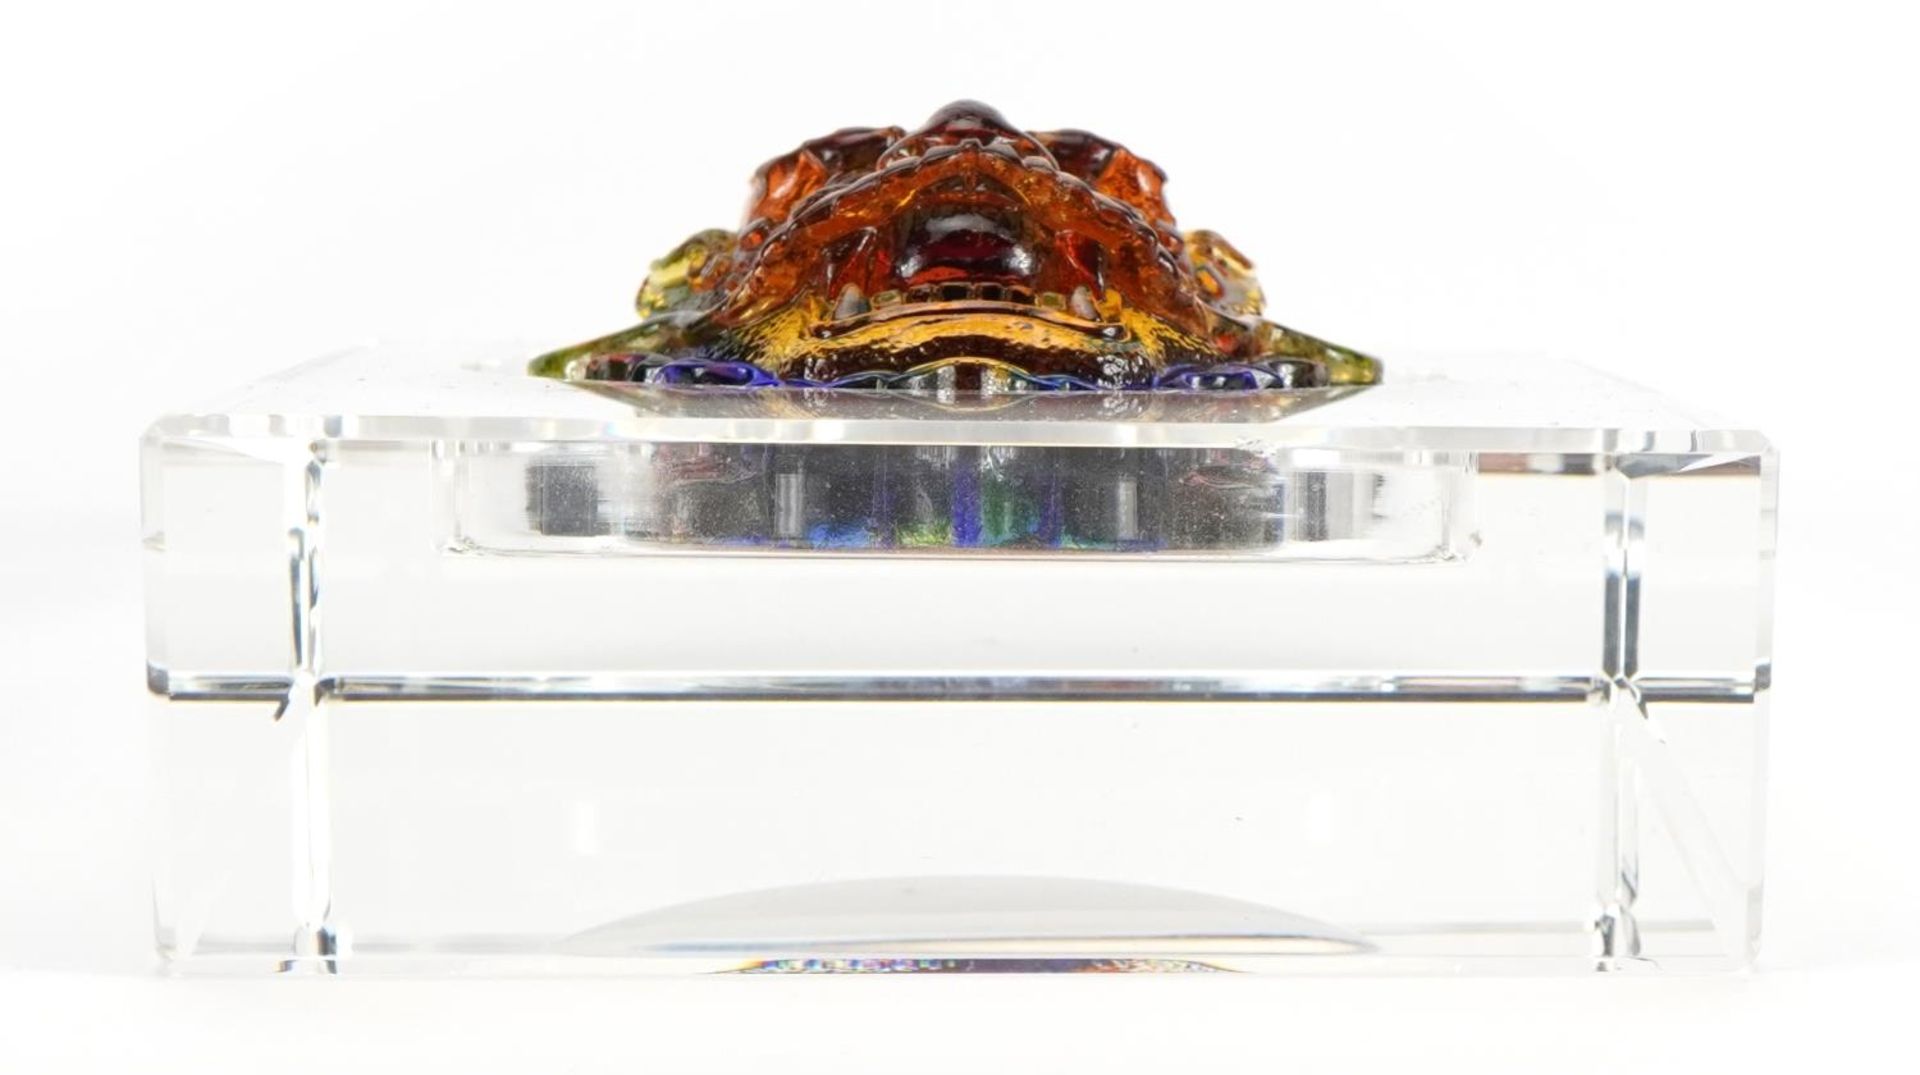 Chinese glass dragon design paperweight with box, 17cm high - Image 5 of 5